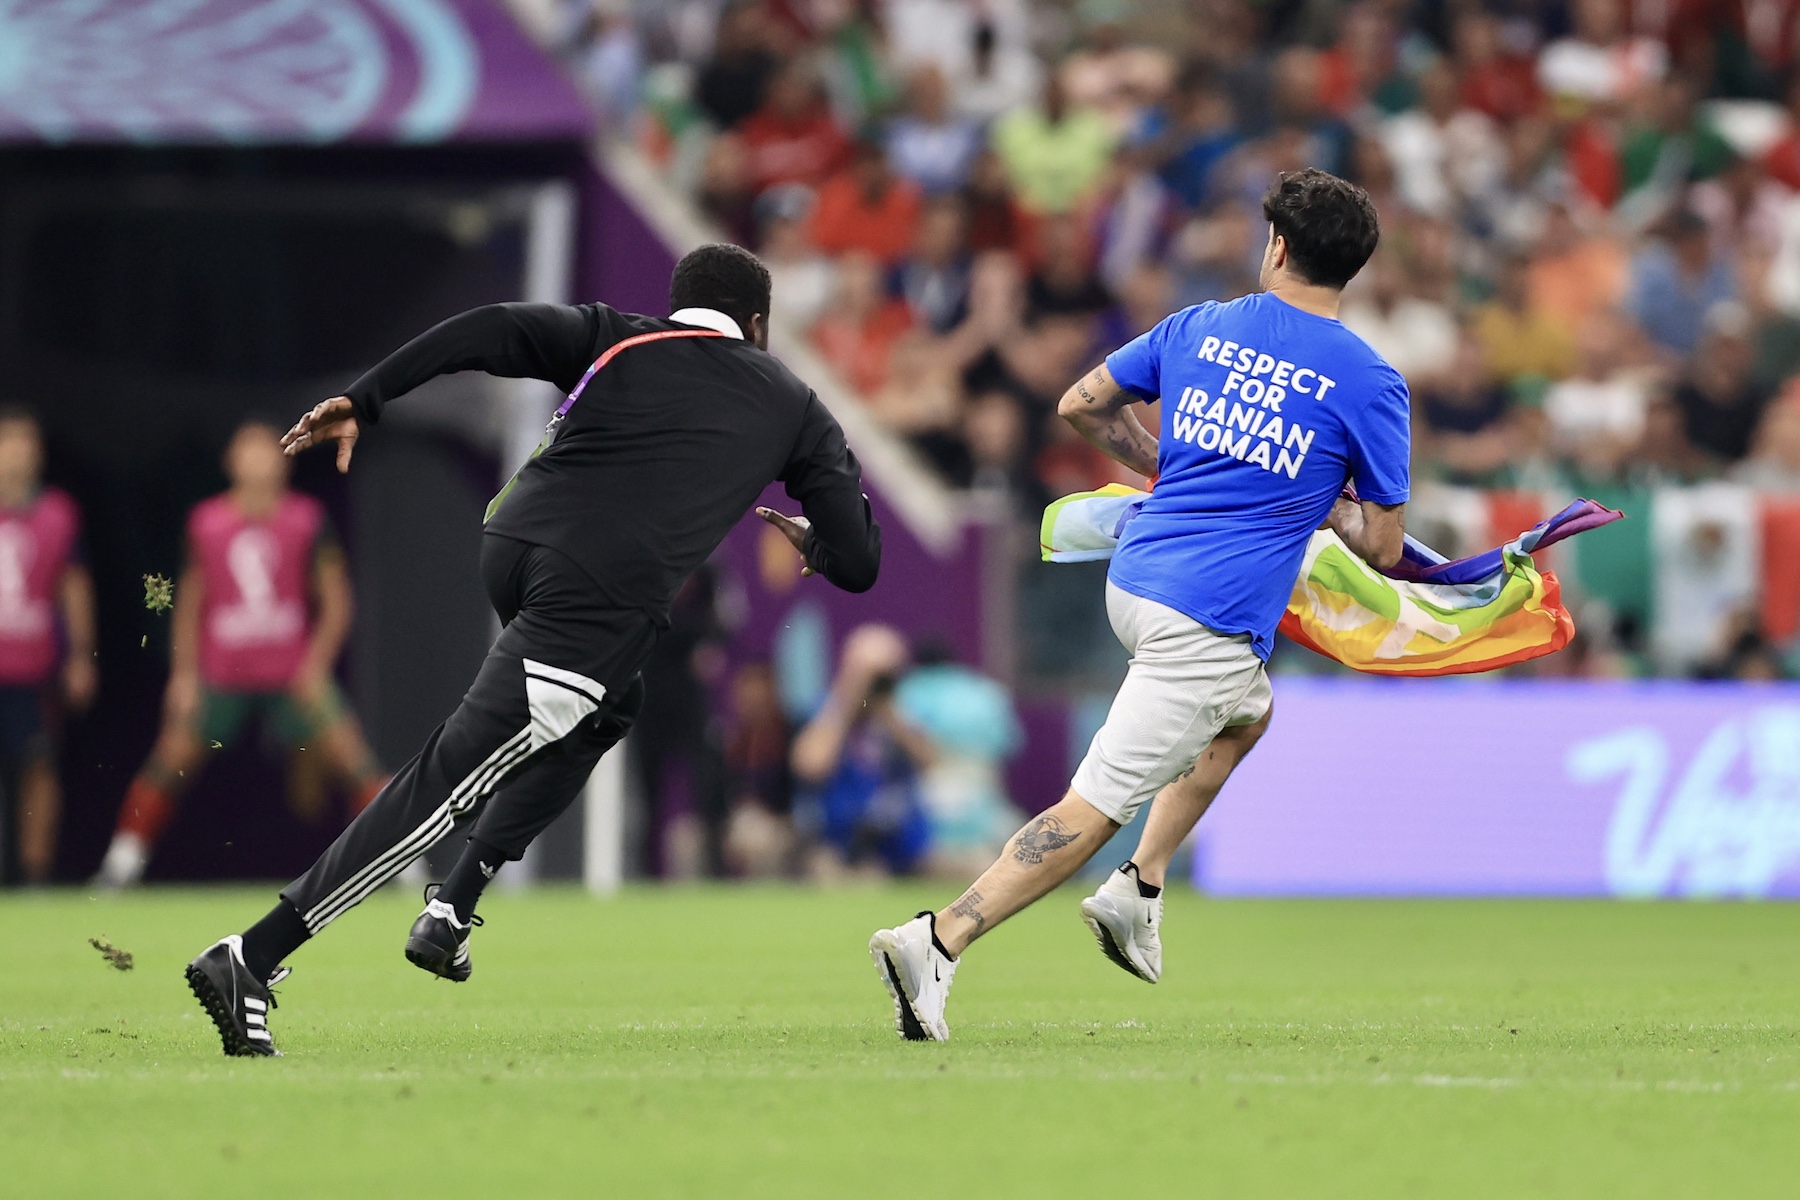 This Italian Fan Invaded The Pitch At The World Cup In Support Of LGBTQ People, Iranian Women And Ukraine